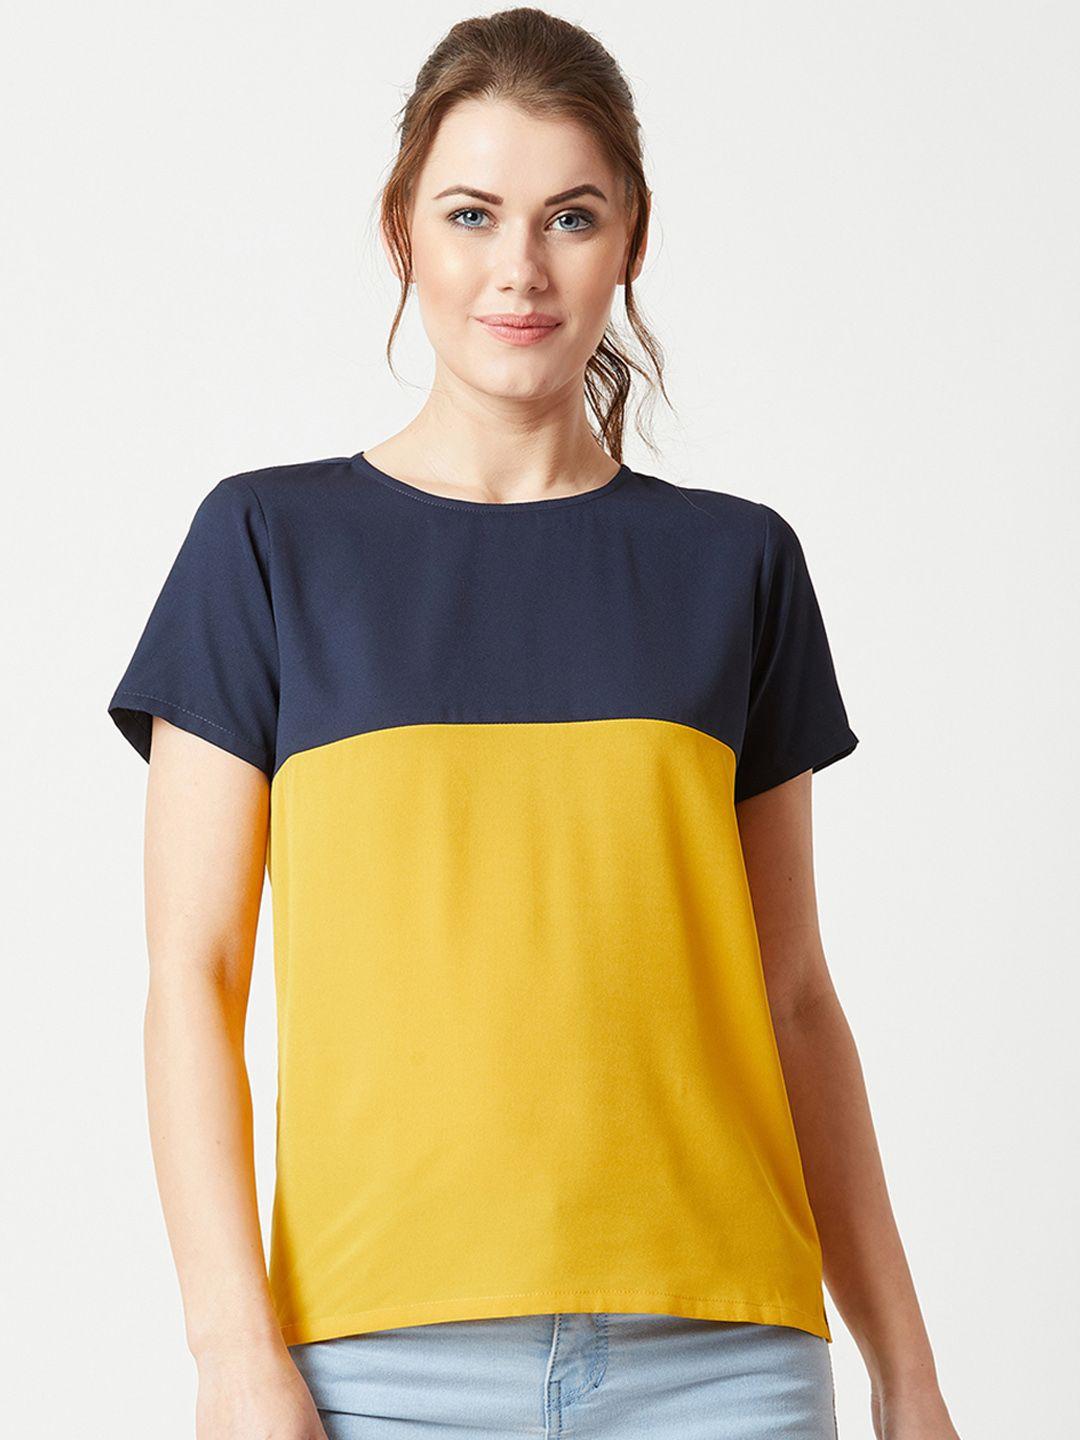 miss-chase-women-navy-blue-&-colourblocked-top